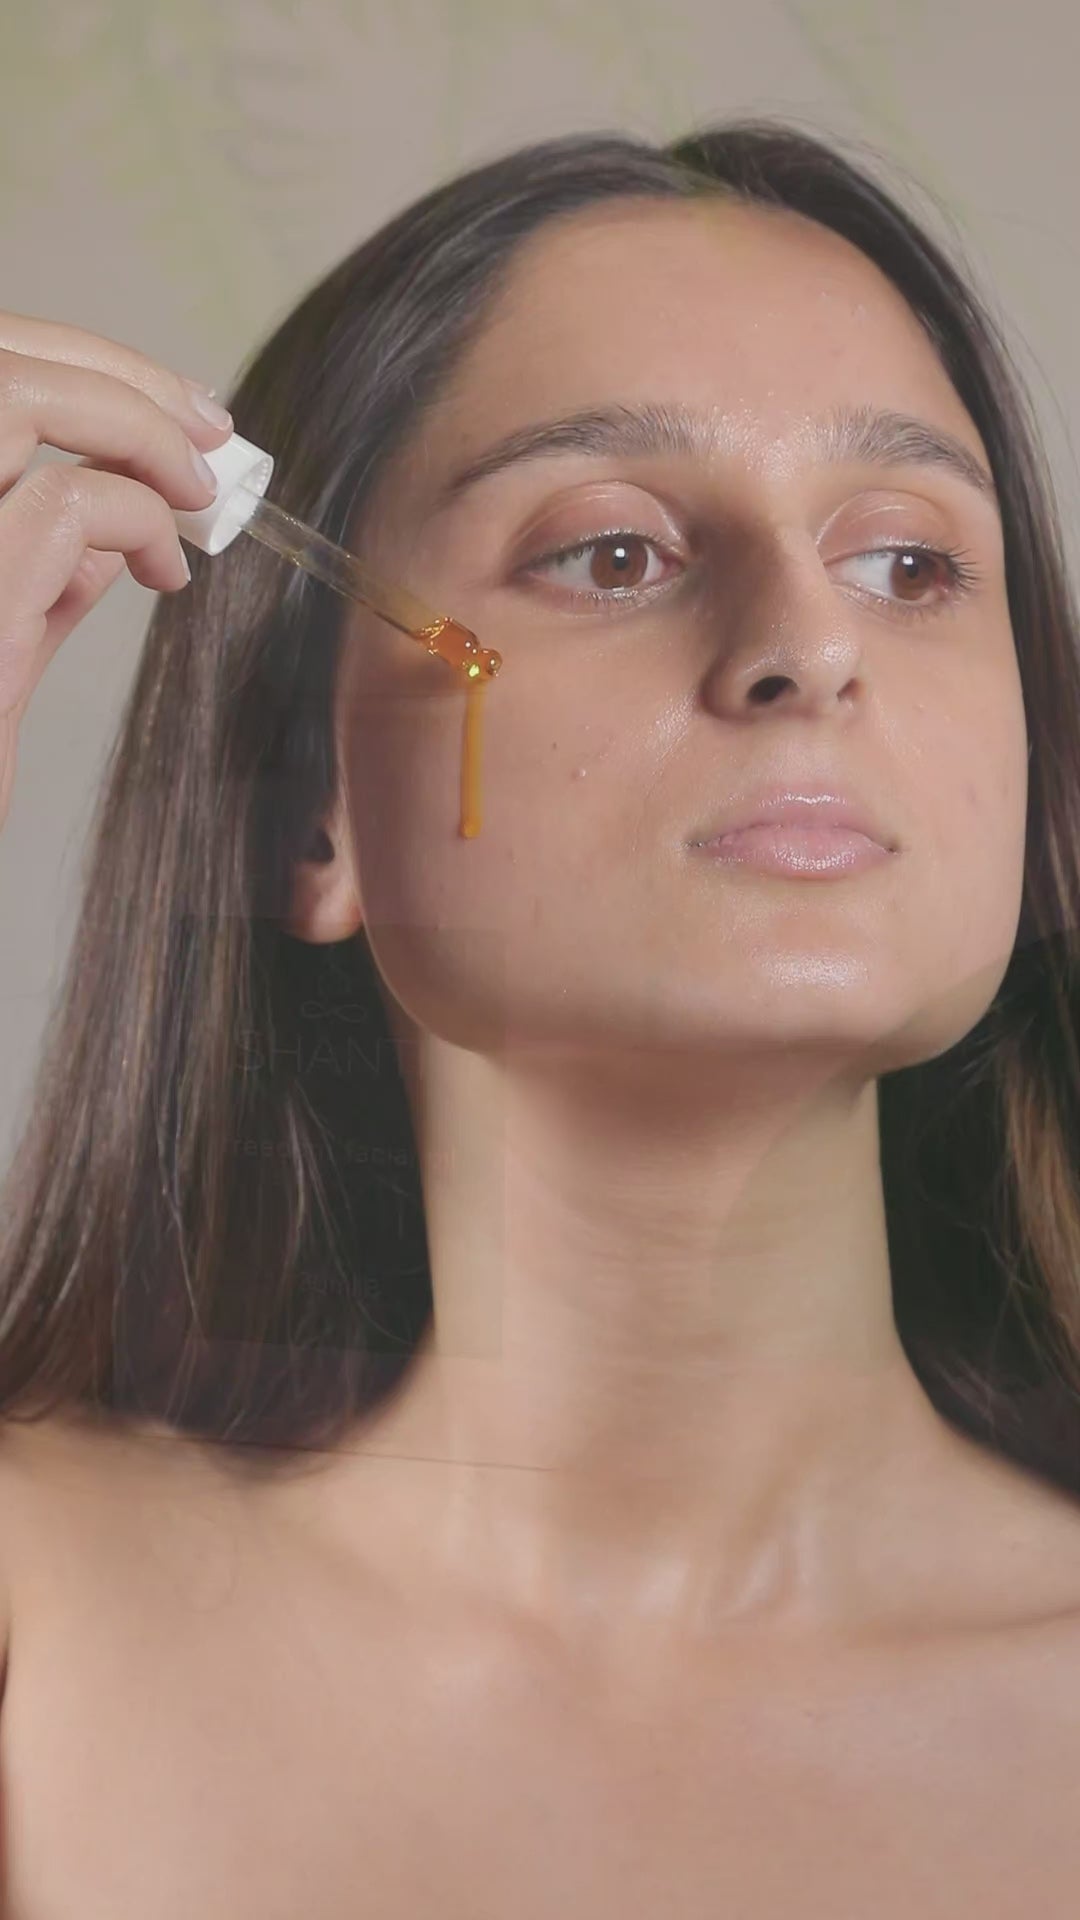 Video of a woman applying freedom facial oil and using gua sha tool on her face.